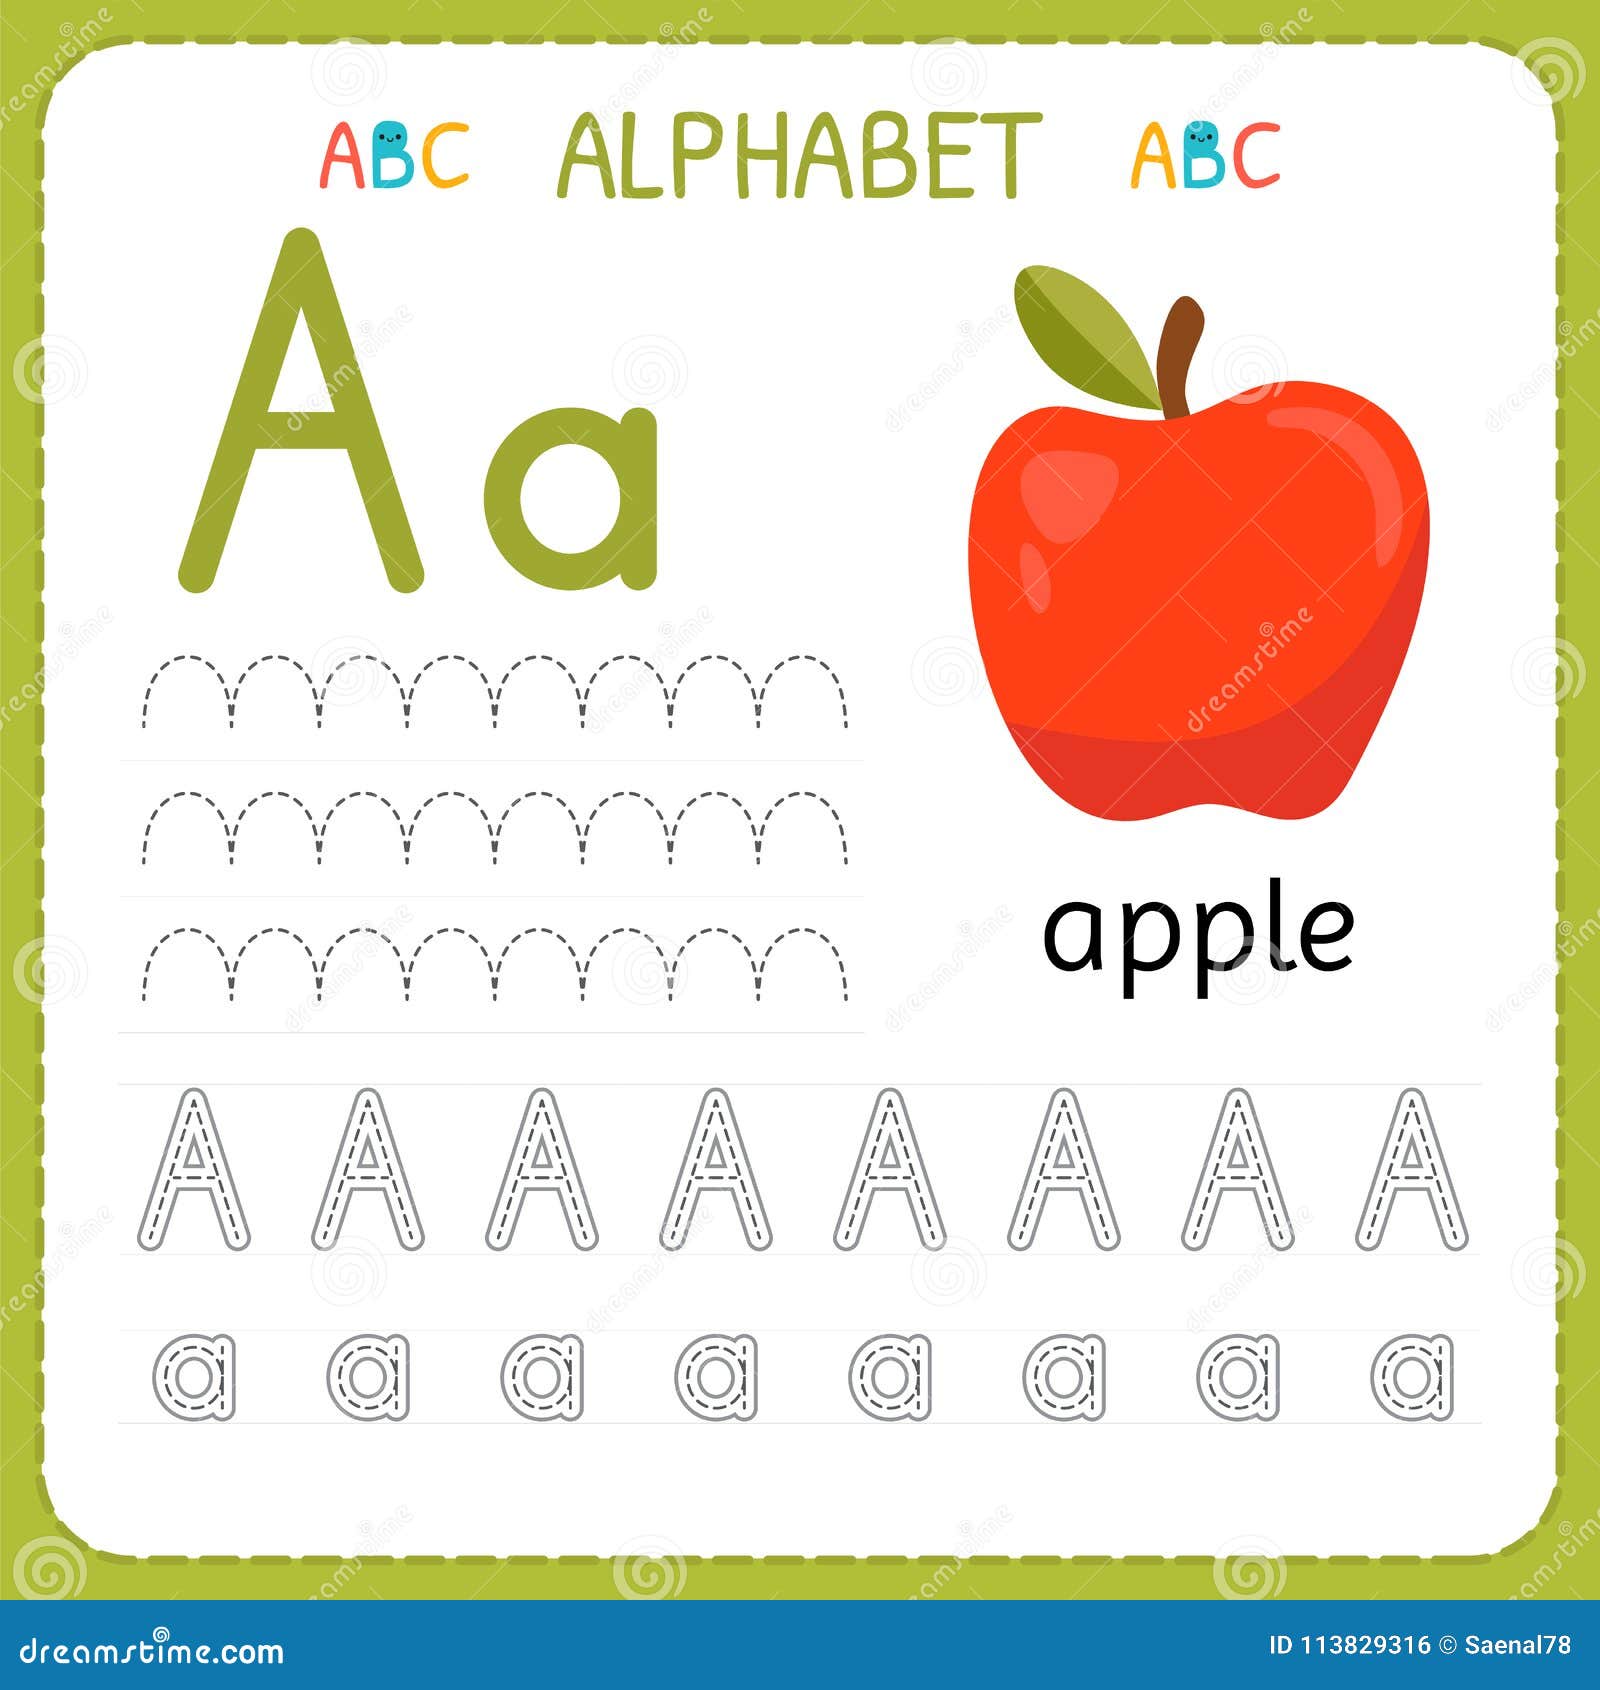 Alphabet Tracing Worksheet For Preschool And Kindergarten Writing Practice Letter A Exercises For Kids Stock Vector Illustration Of Alphabet Activity